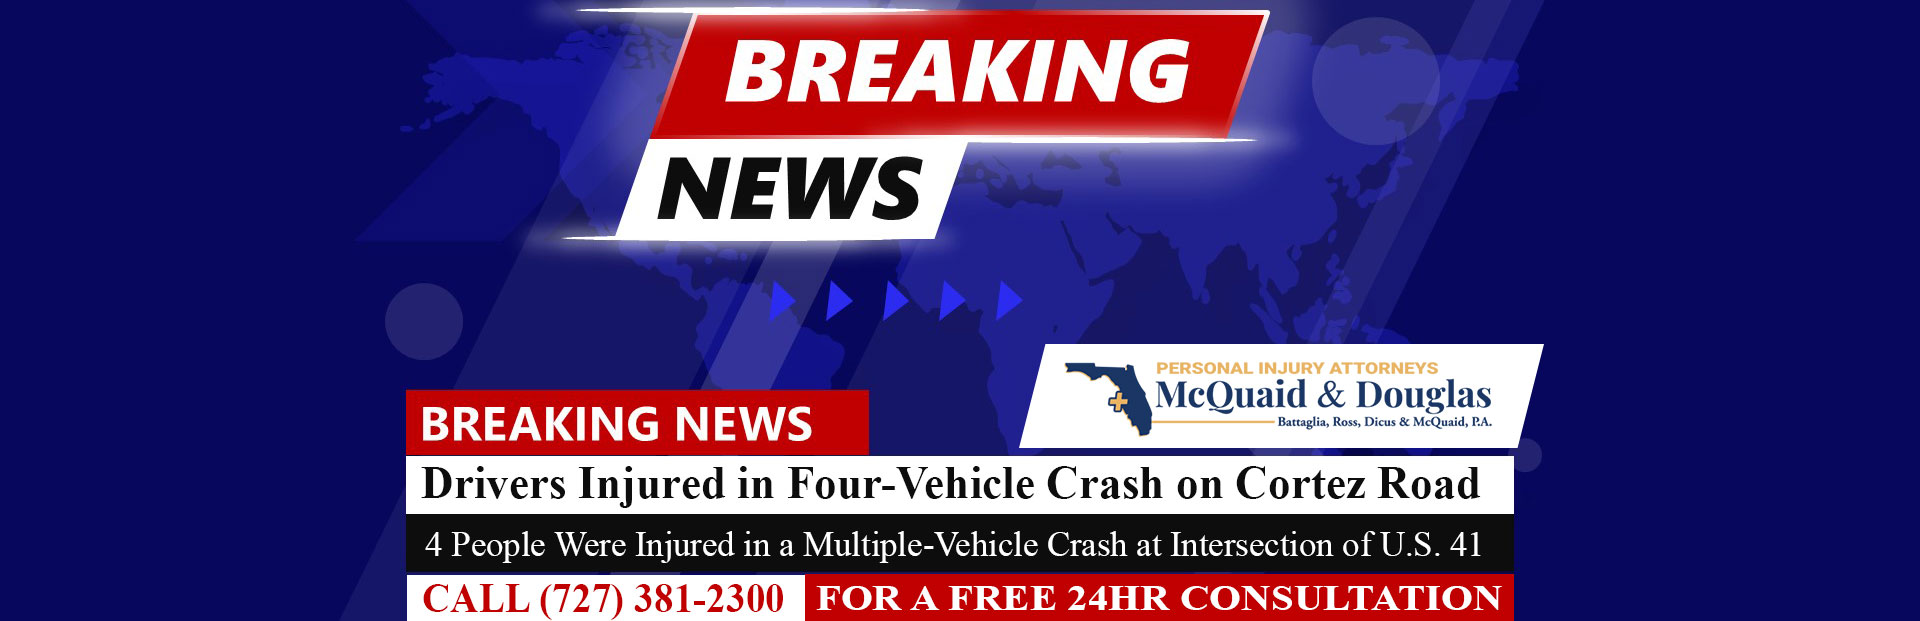 [9-17-22] Drivers Injured in Four-Vehicle Crash on Cortez Road